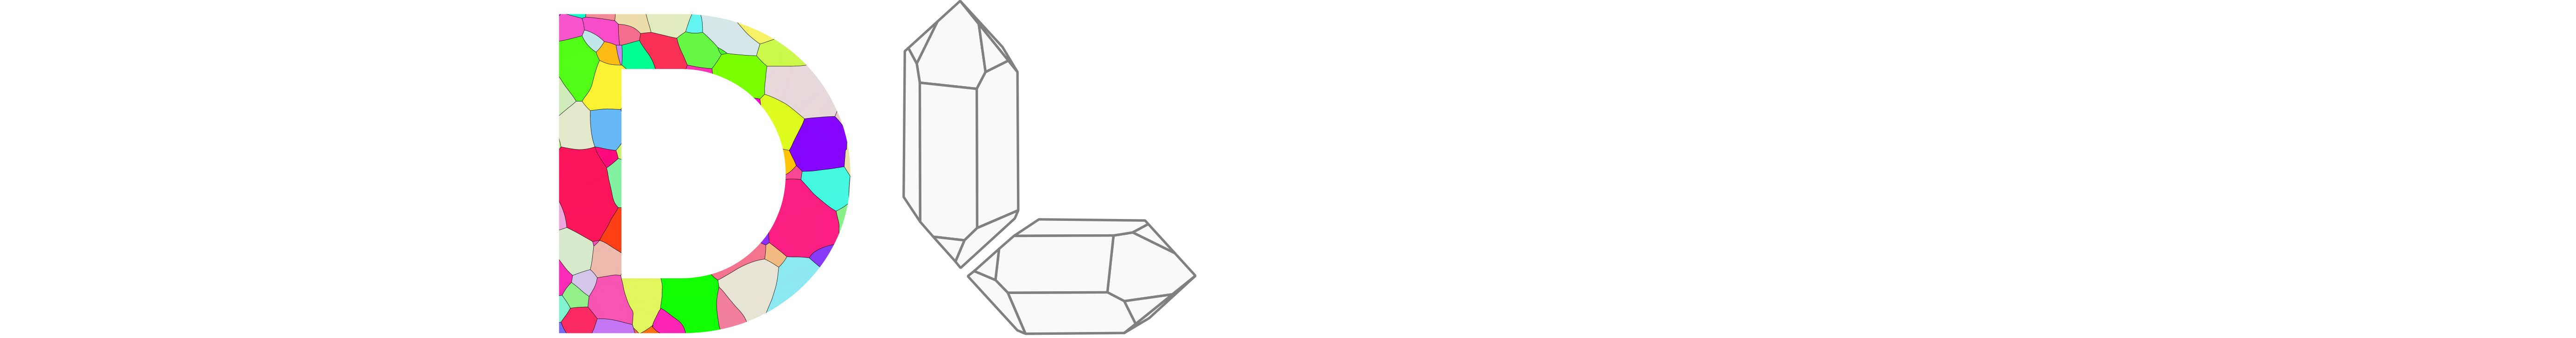 Rock and Ice Deformation Laboratory (RIDL)